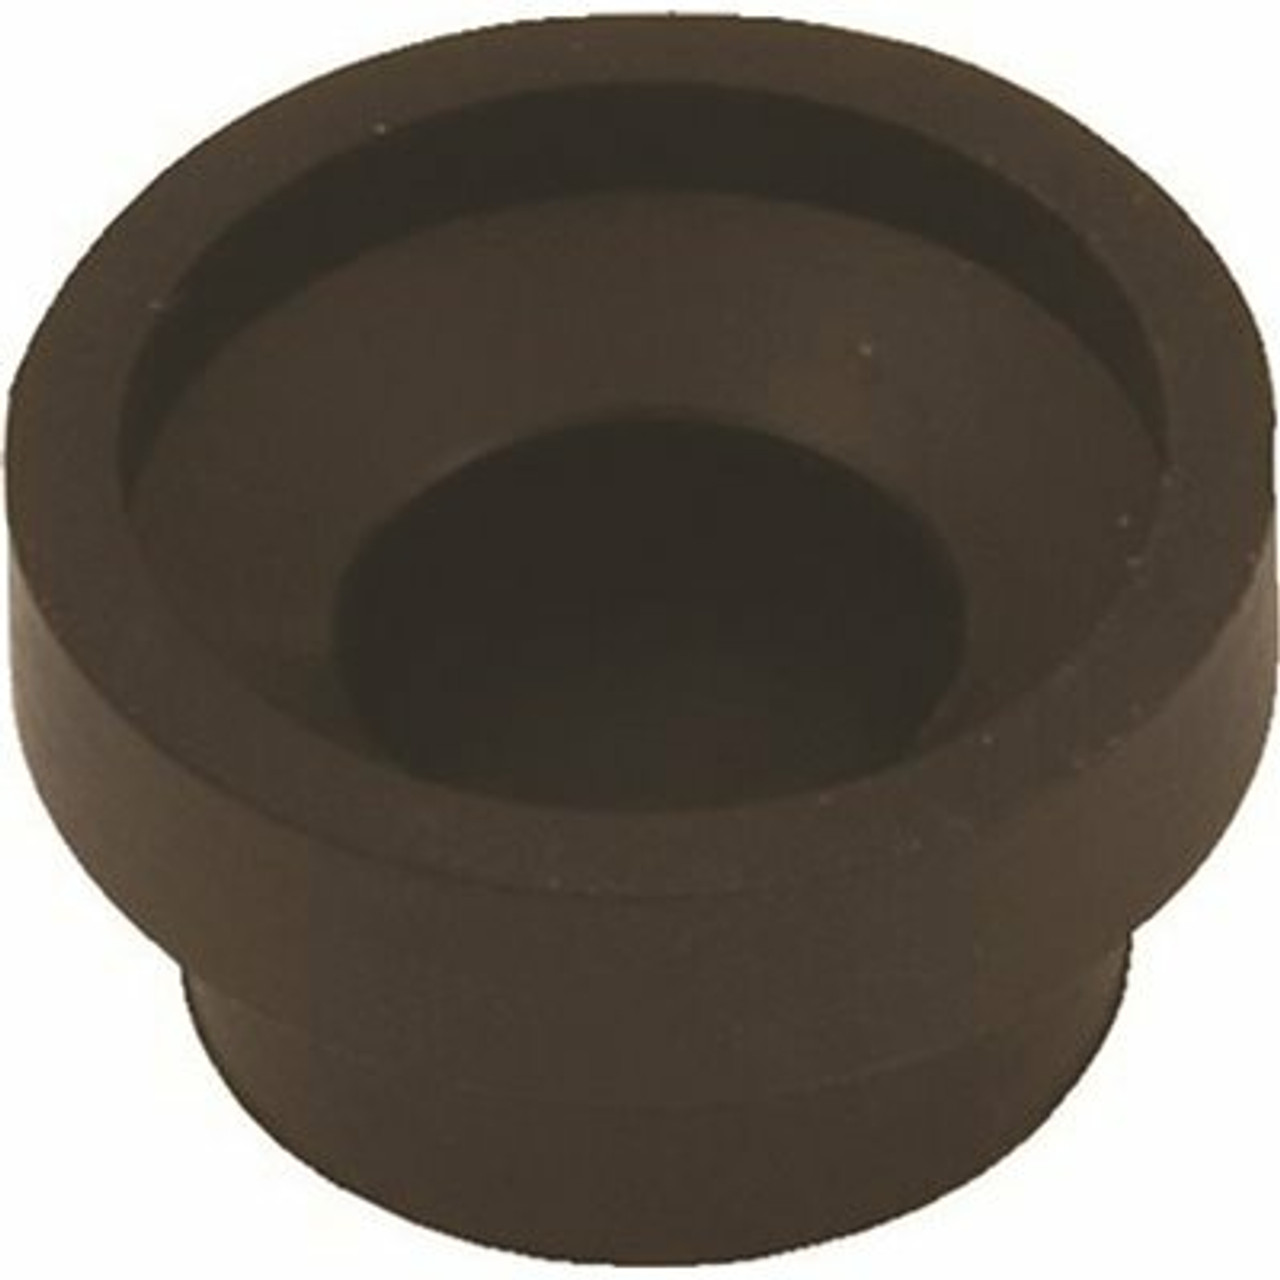 Proplus 11/16 In. Diaphragm For American Standard Faucets Aqua Seal Washer